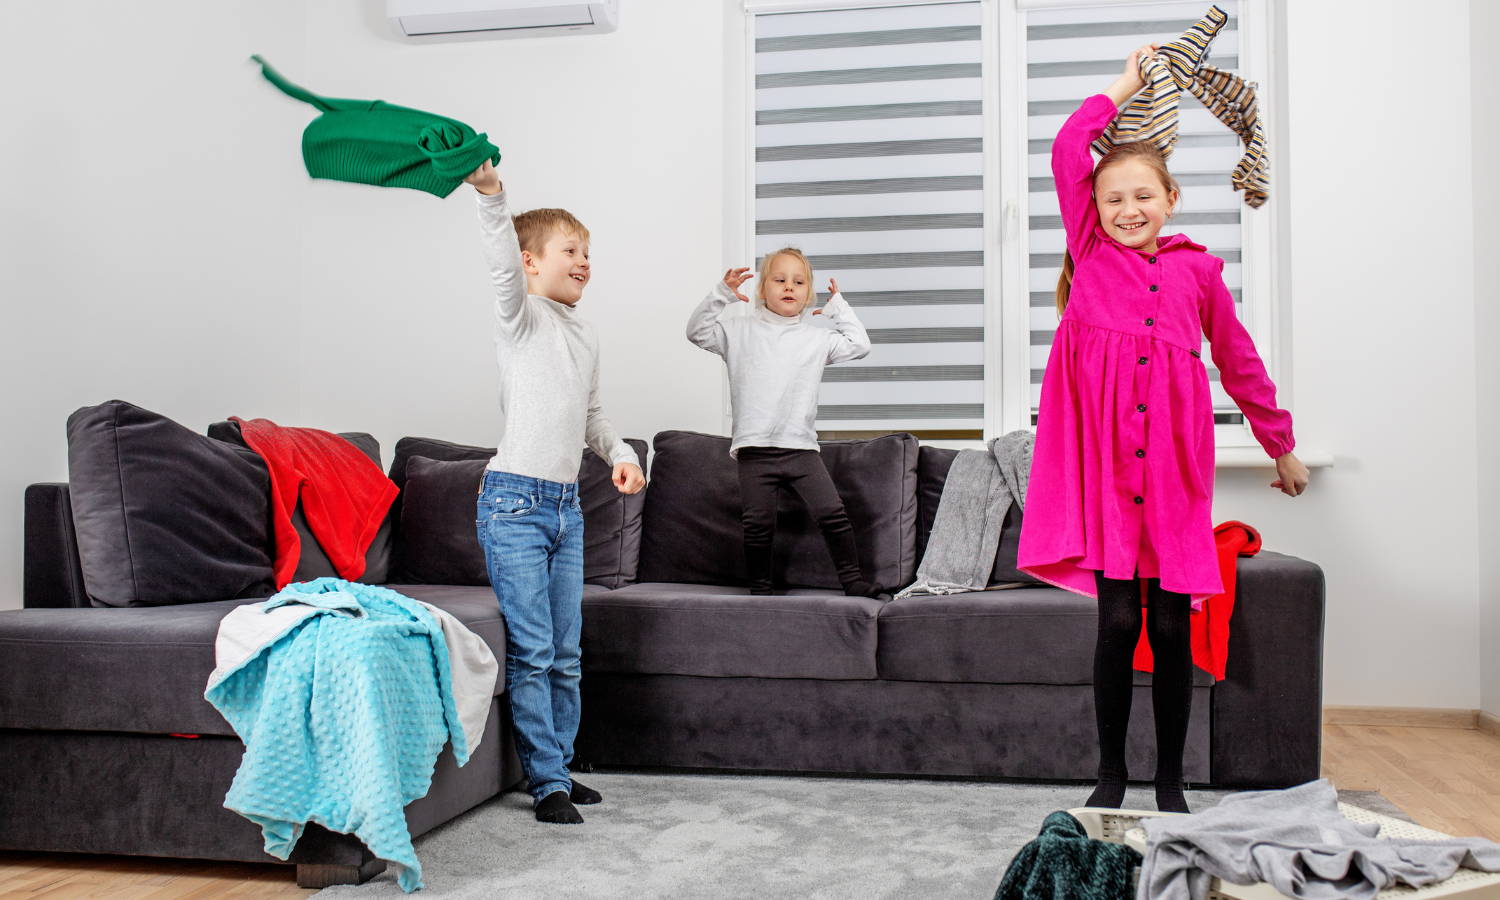 kids in a living room on a sofa throwing clothes around and making a mess